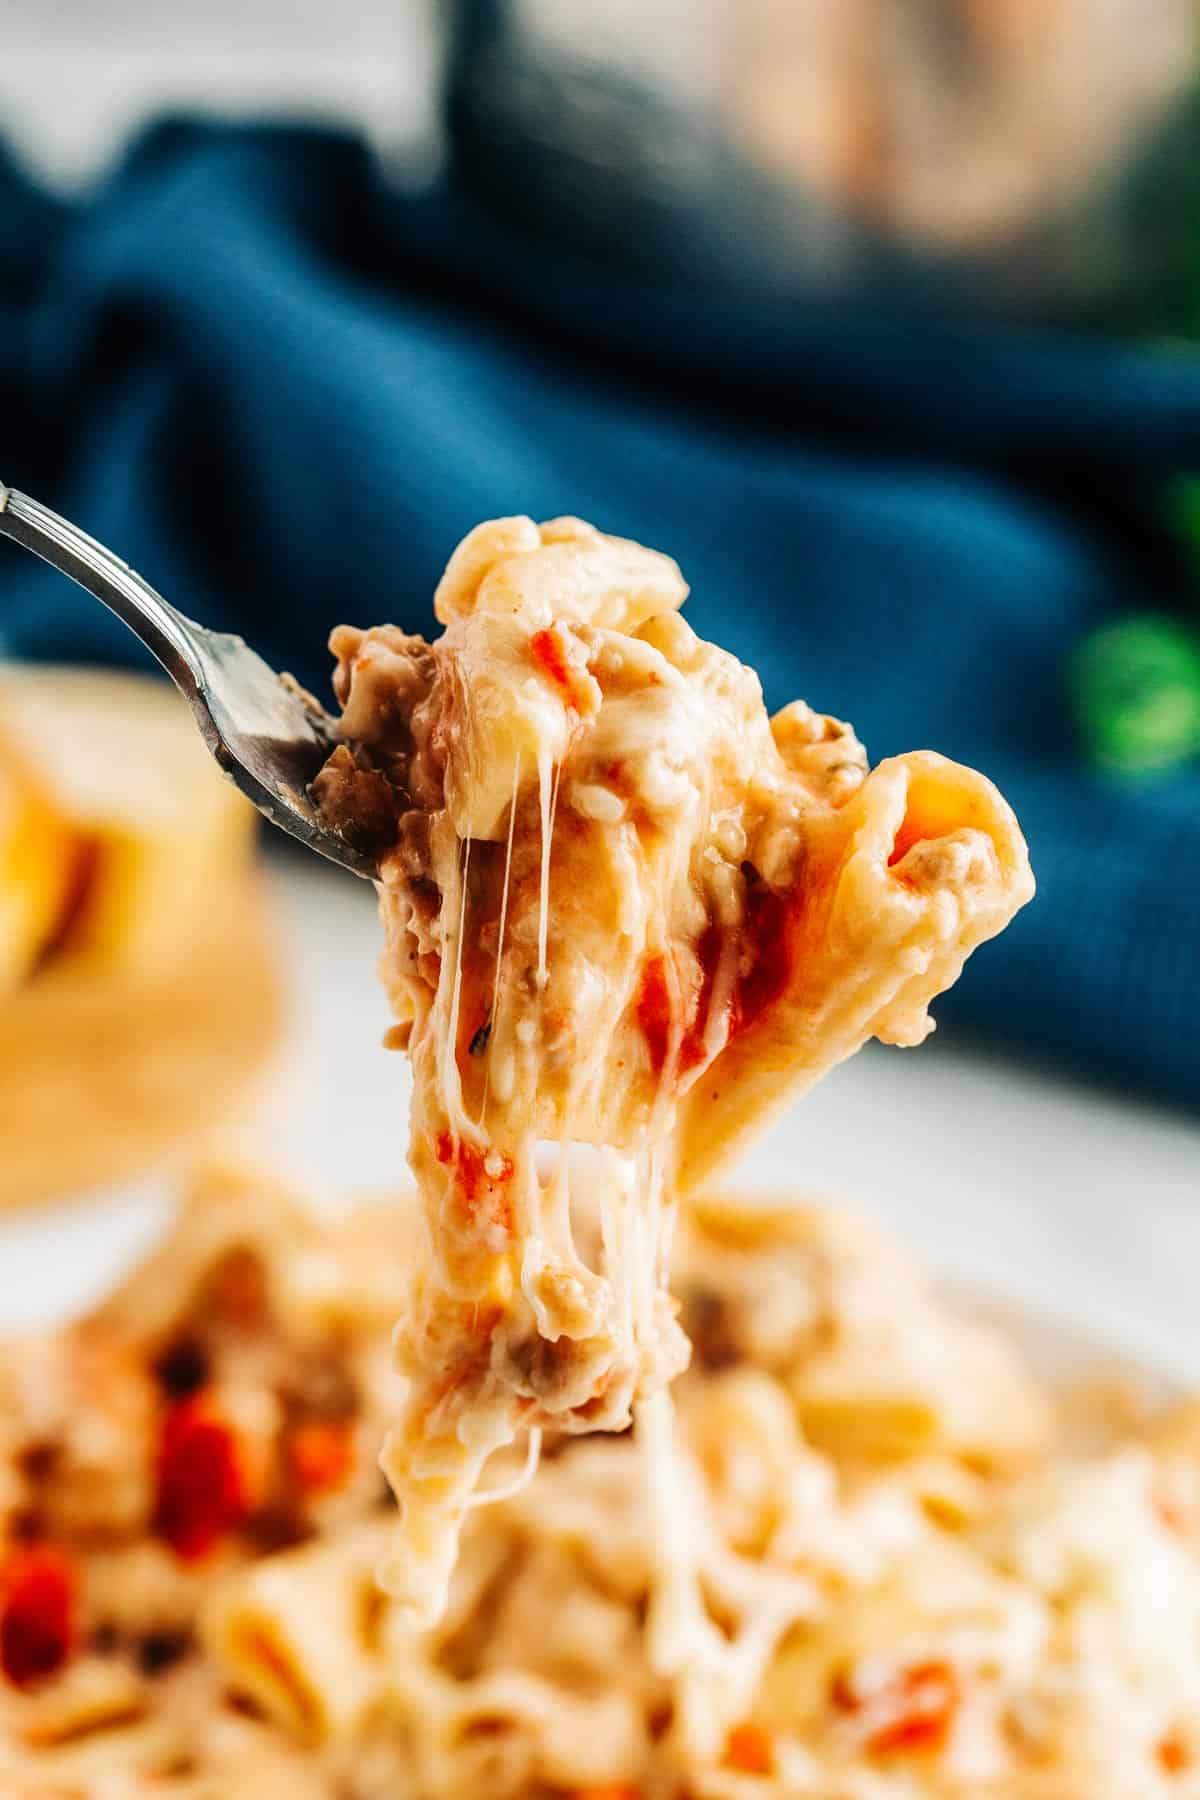 Closeup of a forkful of pasta